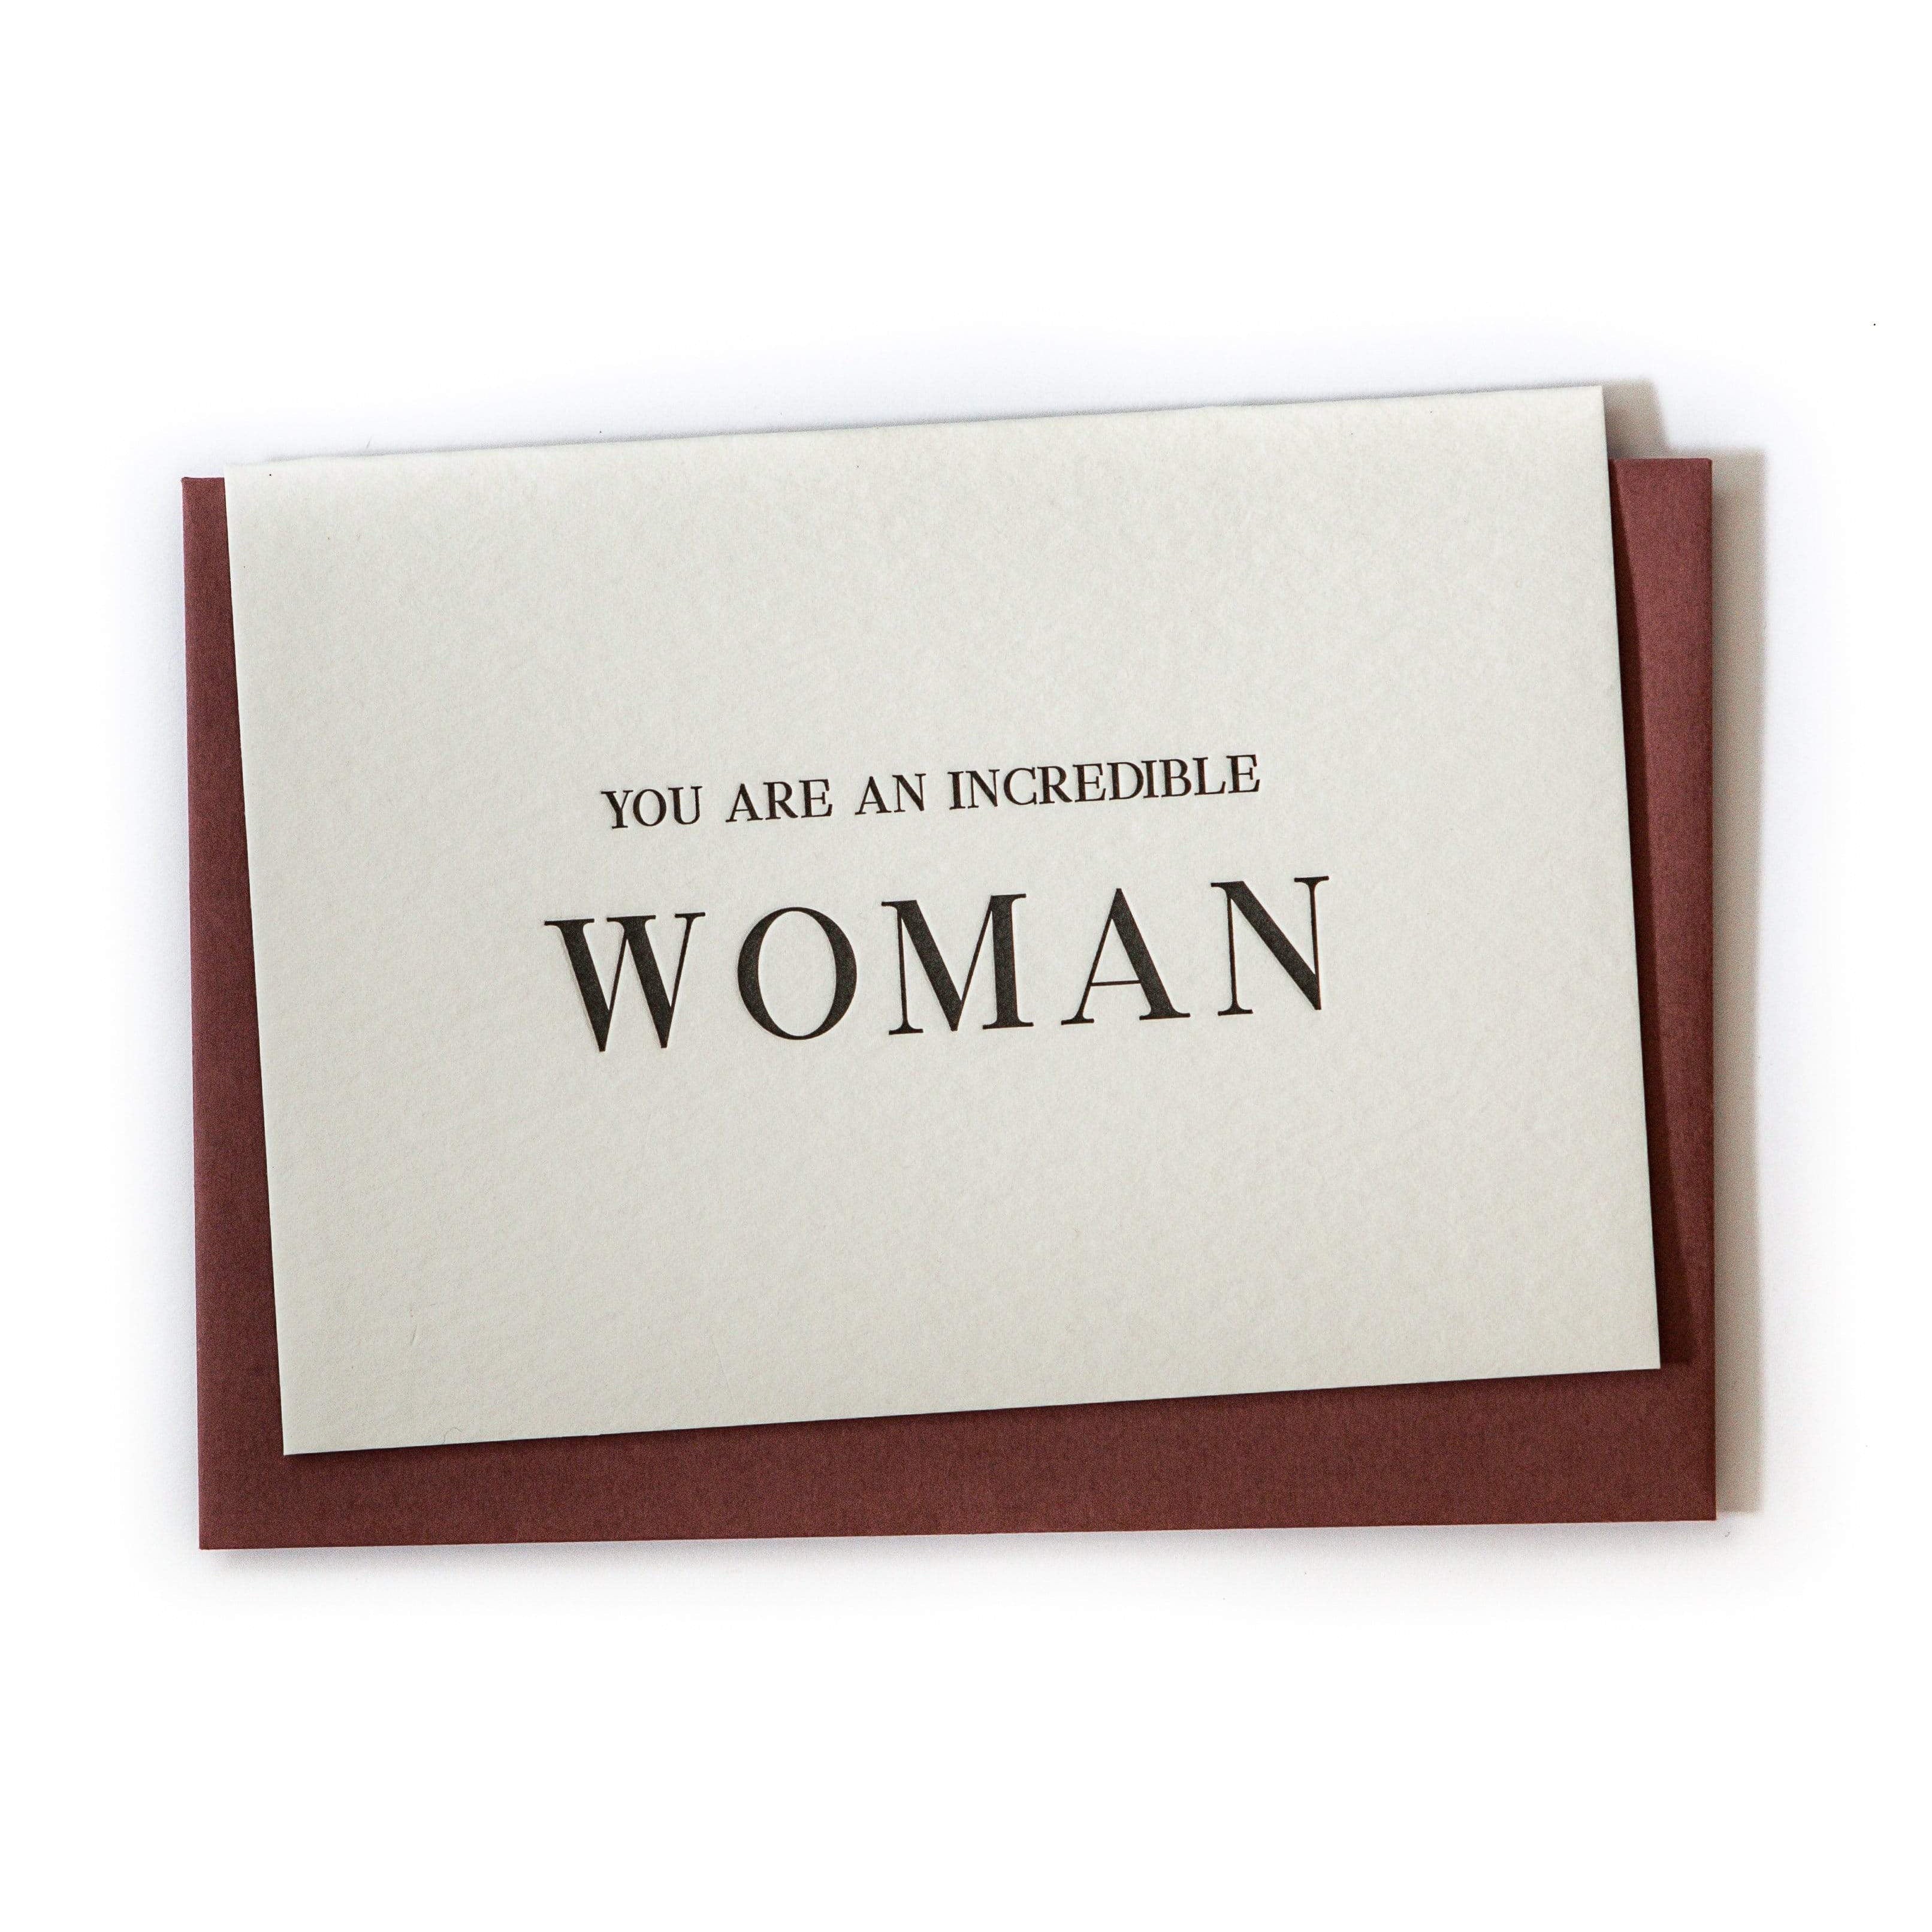 greeting cards Incredible Woman by Clare Bernadette